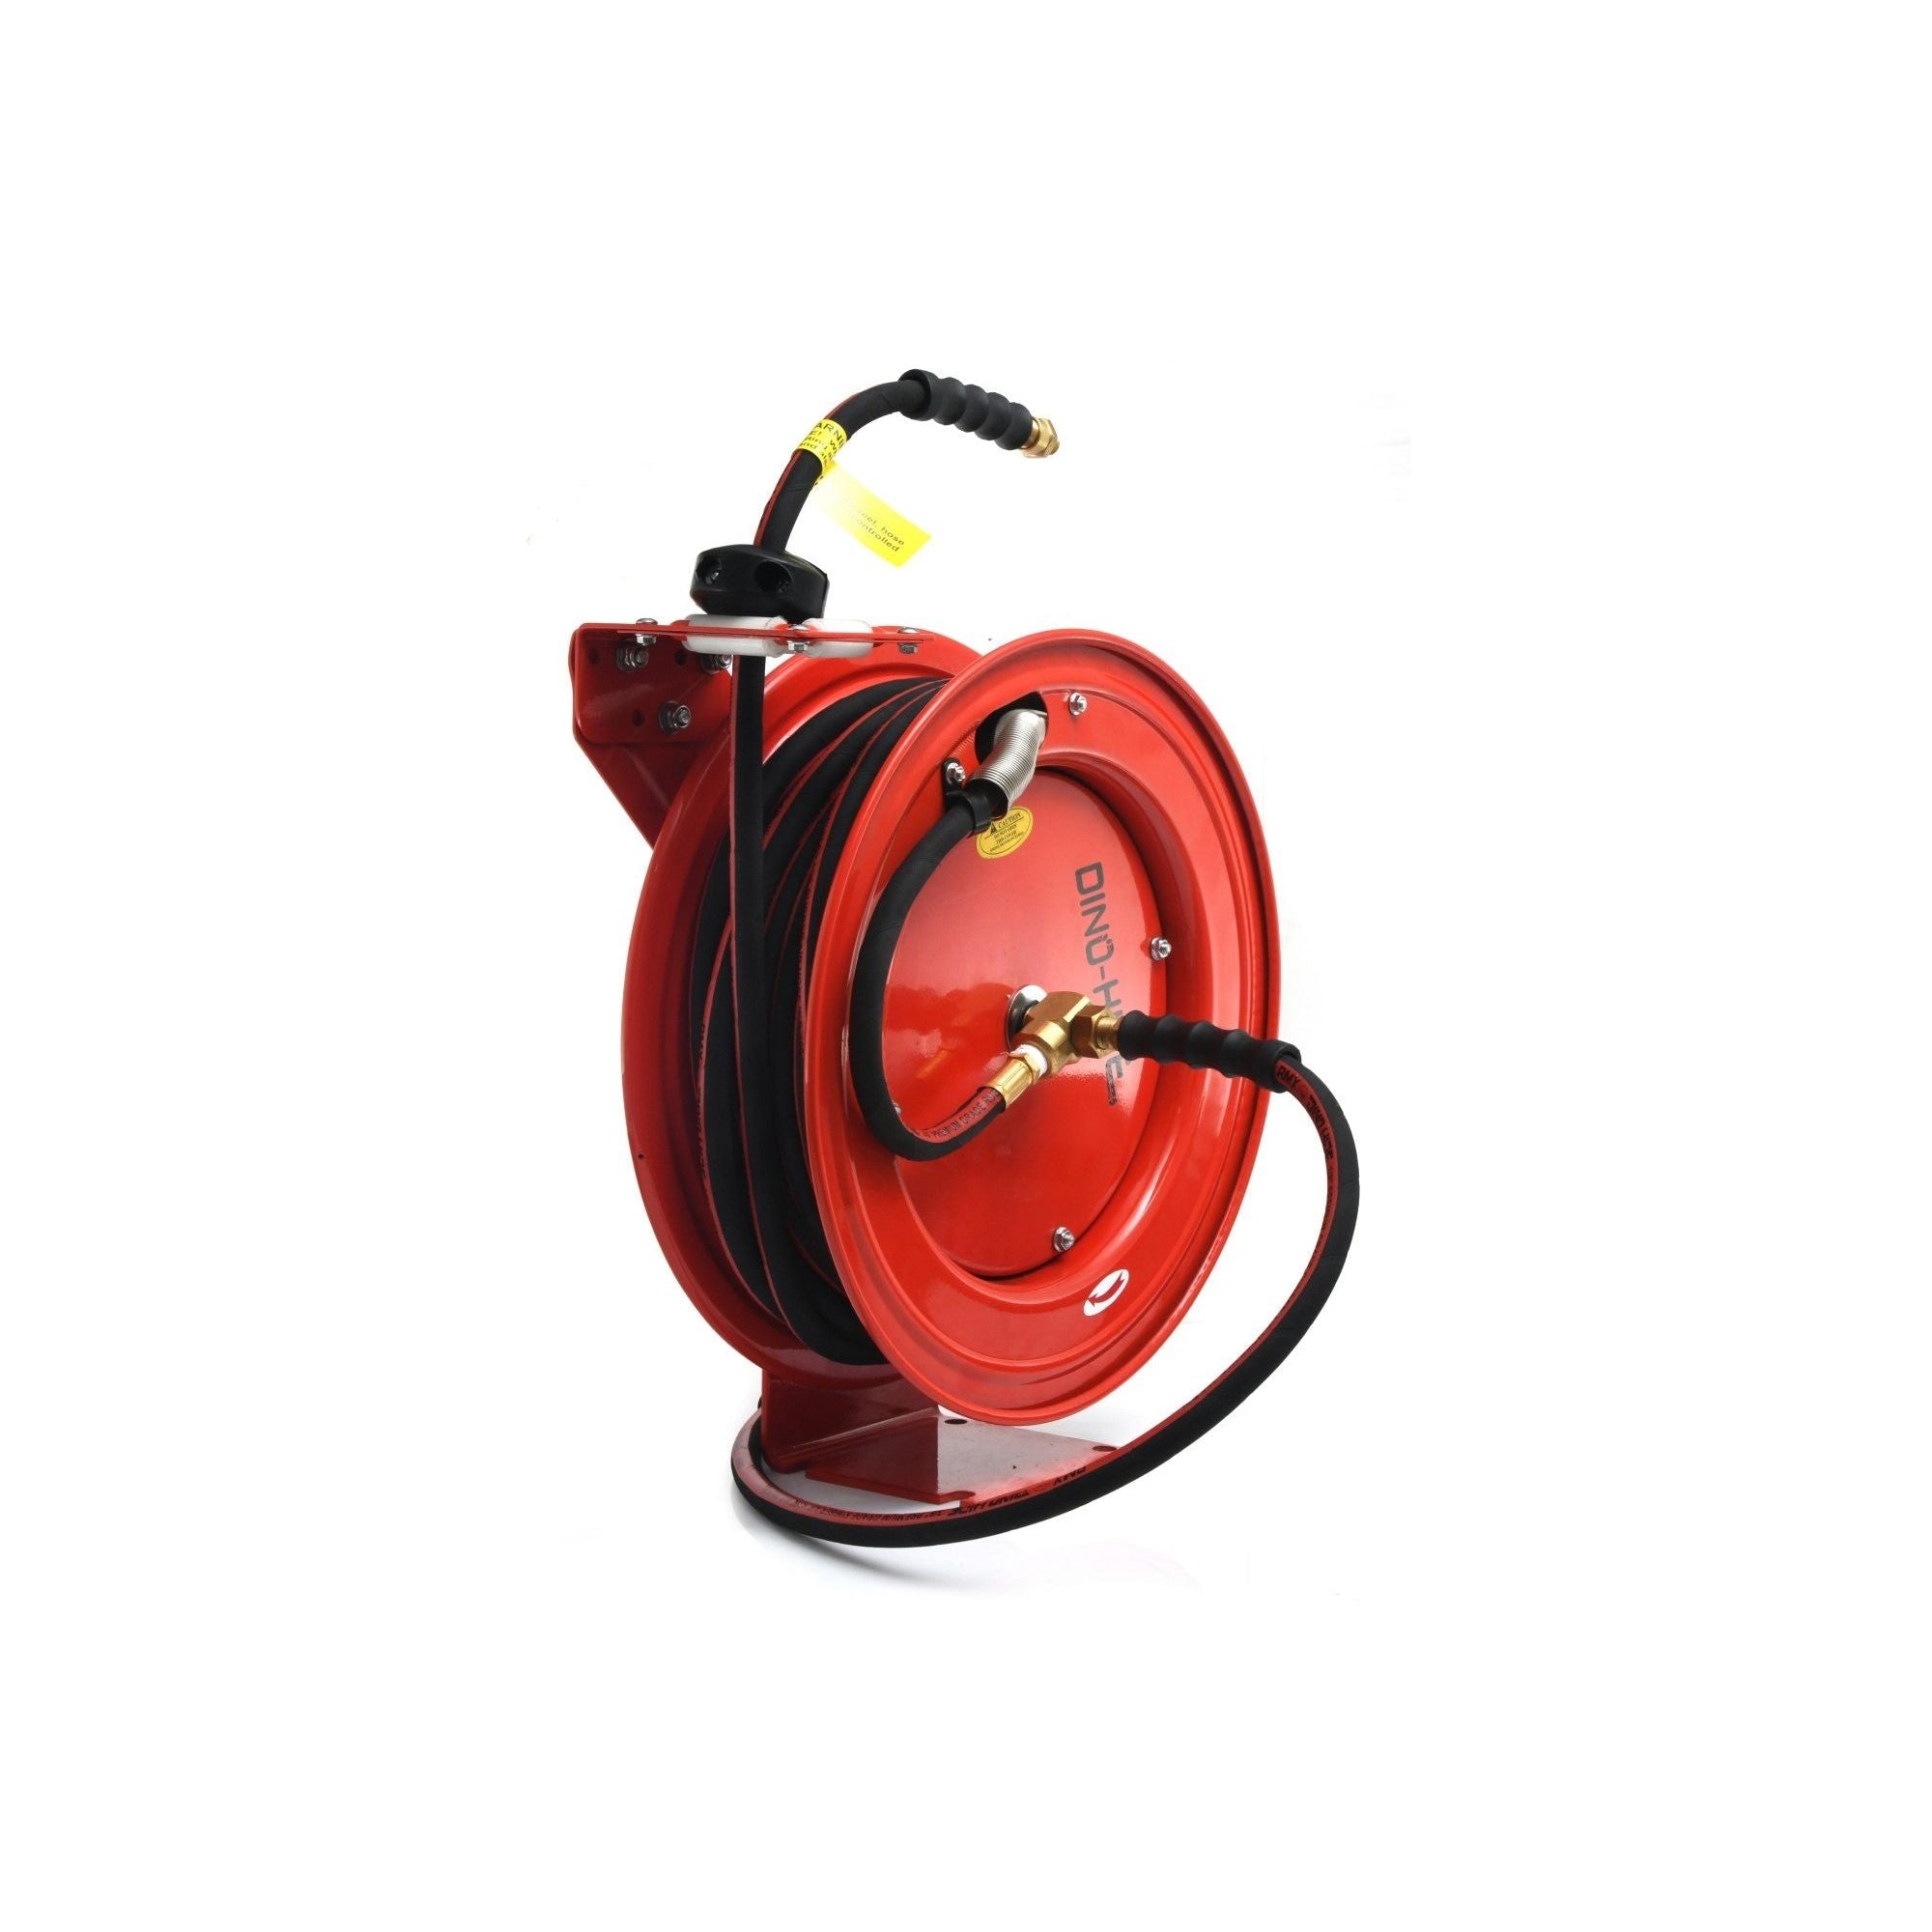 Dino-Hide Air Hose Reel 1/2" x 50' Retractable Heavy Duty Steel Construction with Wrapped Rubber Hose 300 PSI